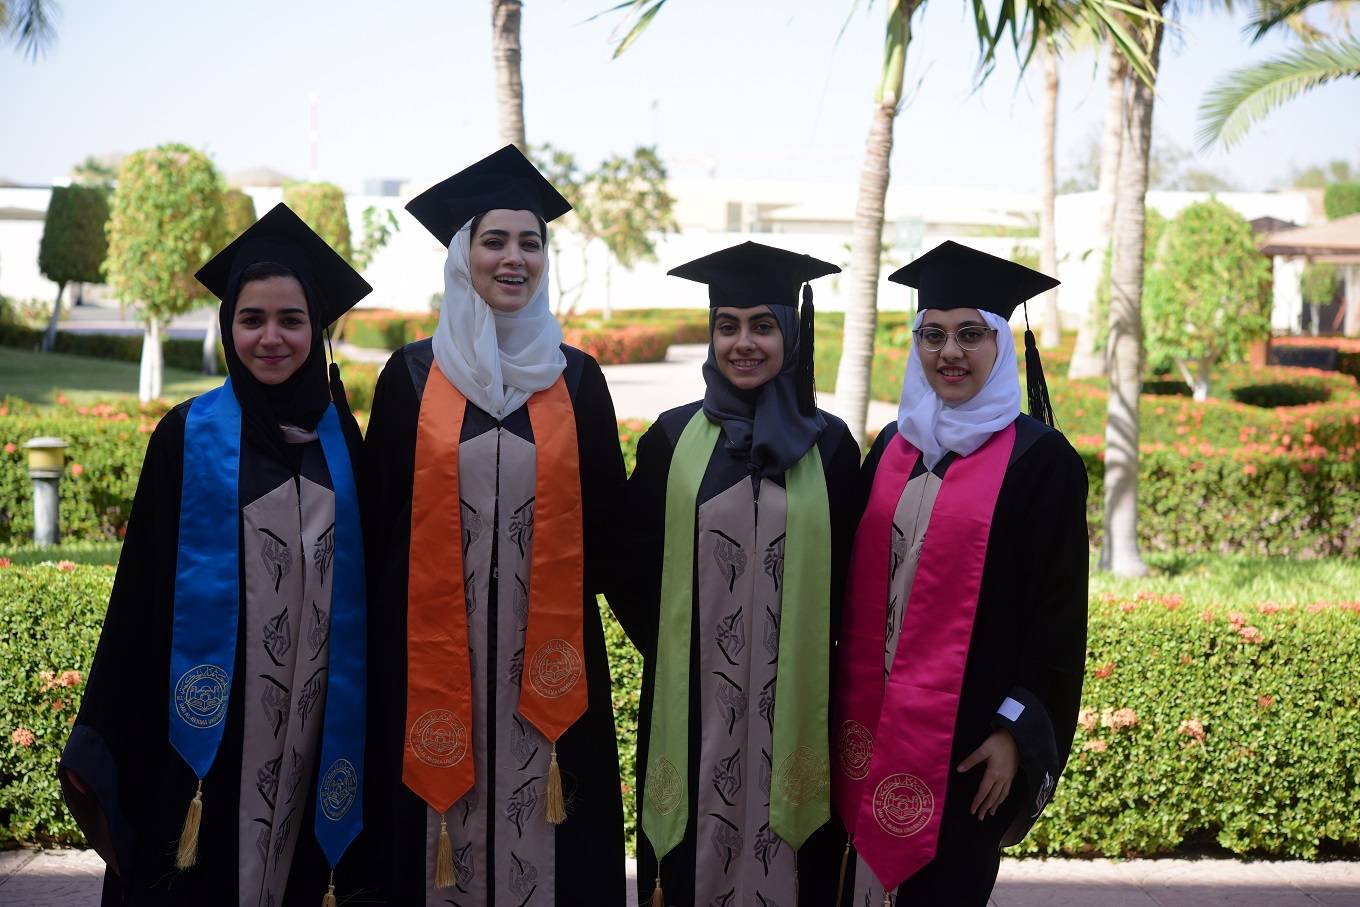 As many 467 undergraduate and postgraduate students graduated from various departments of Dar Al-Hekma University during the academic year 2018-19.